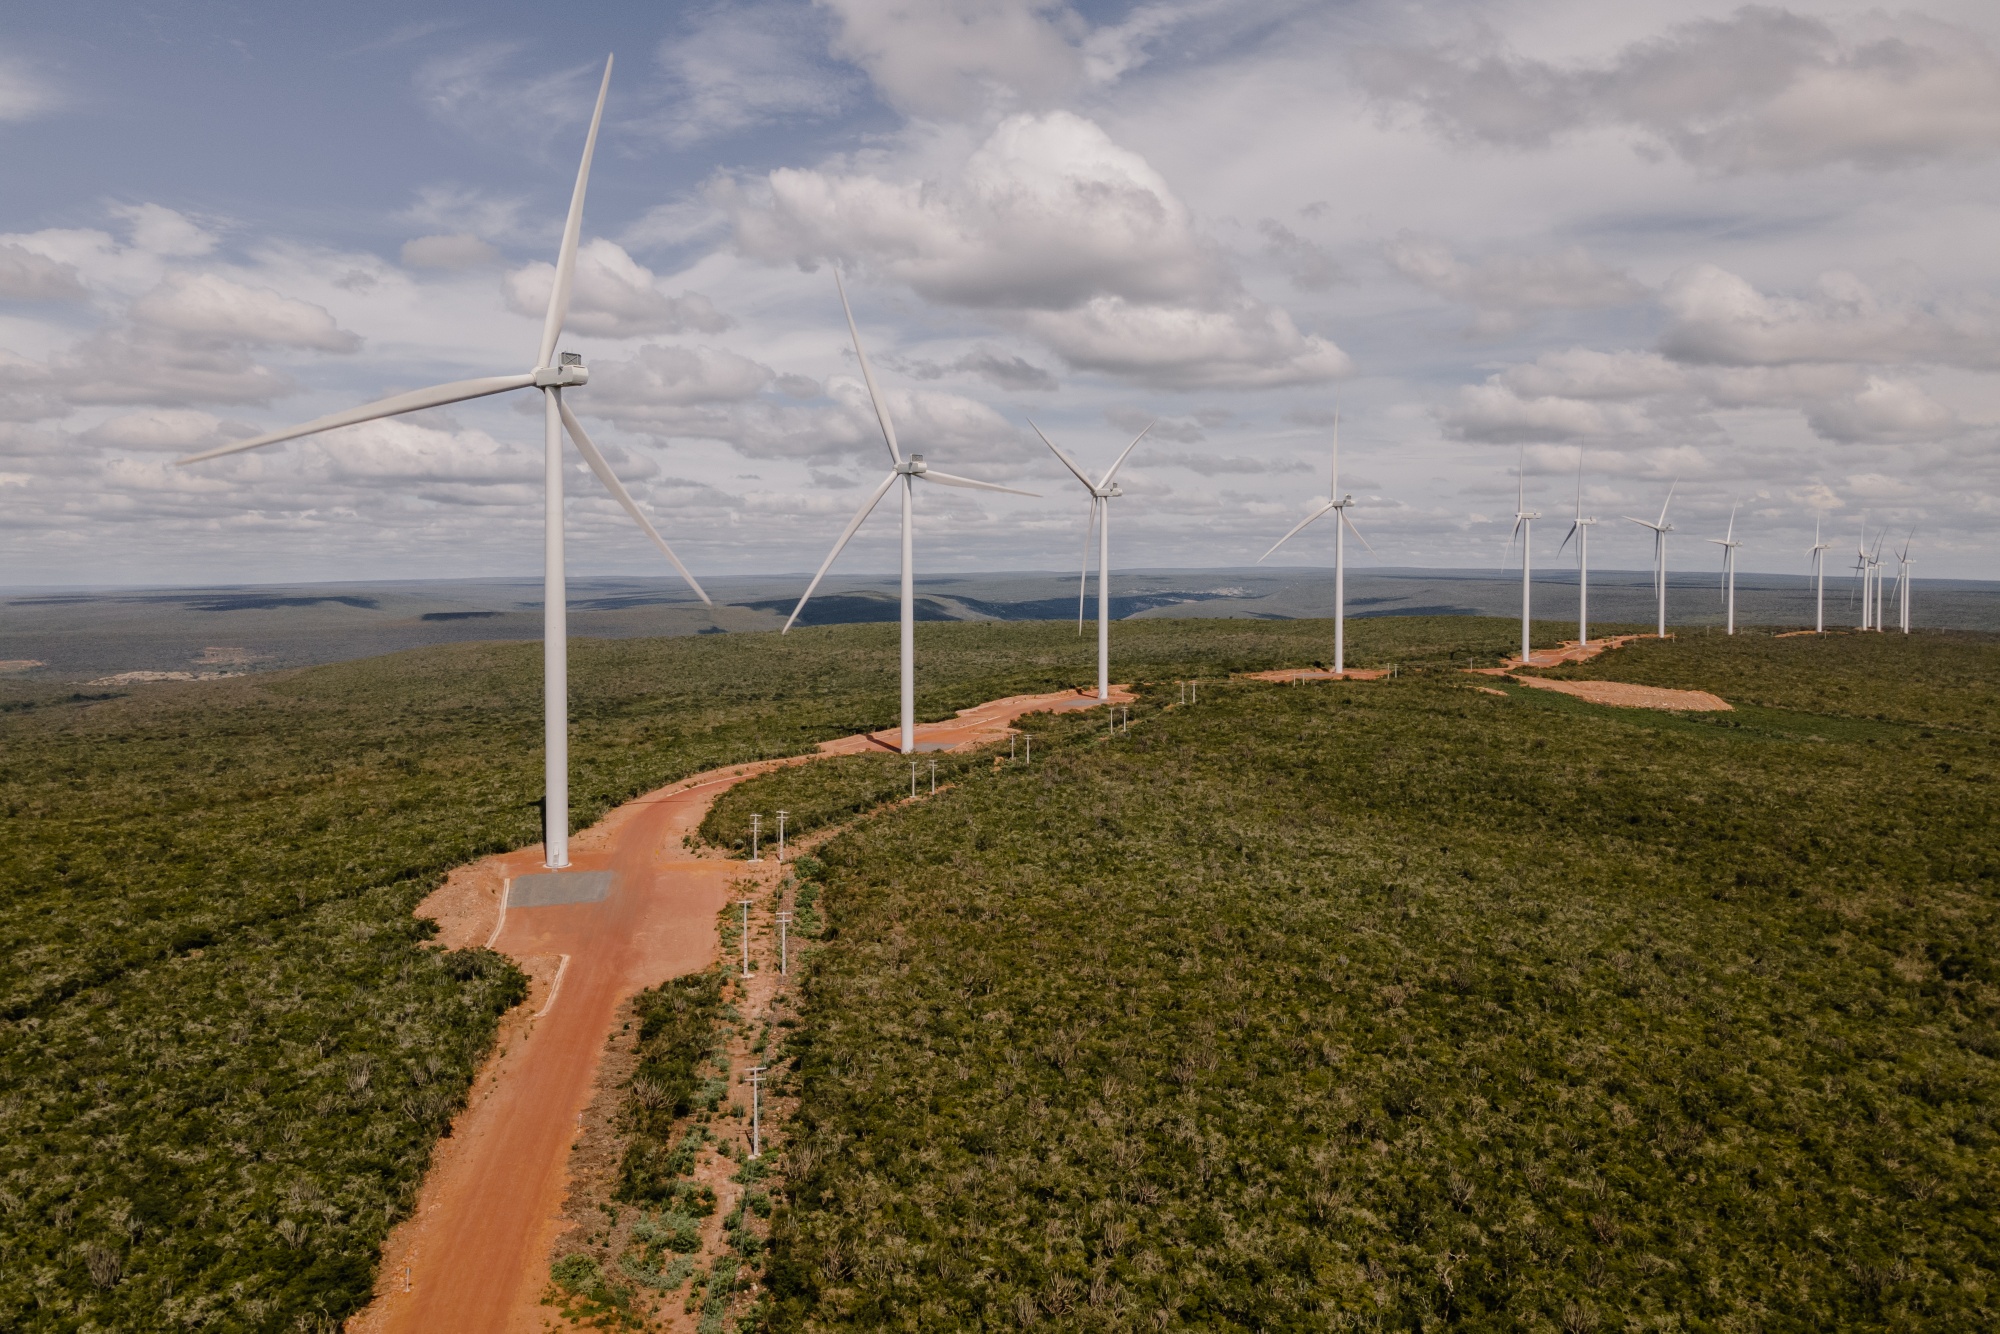 Brazil Aims For Green Hydrogen Market Fueled By Wind Energy